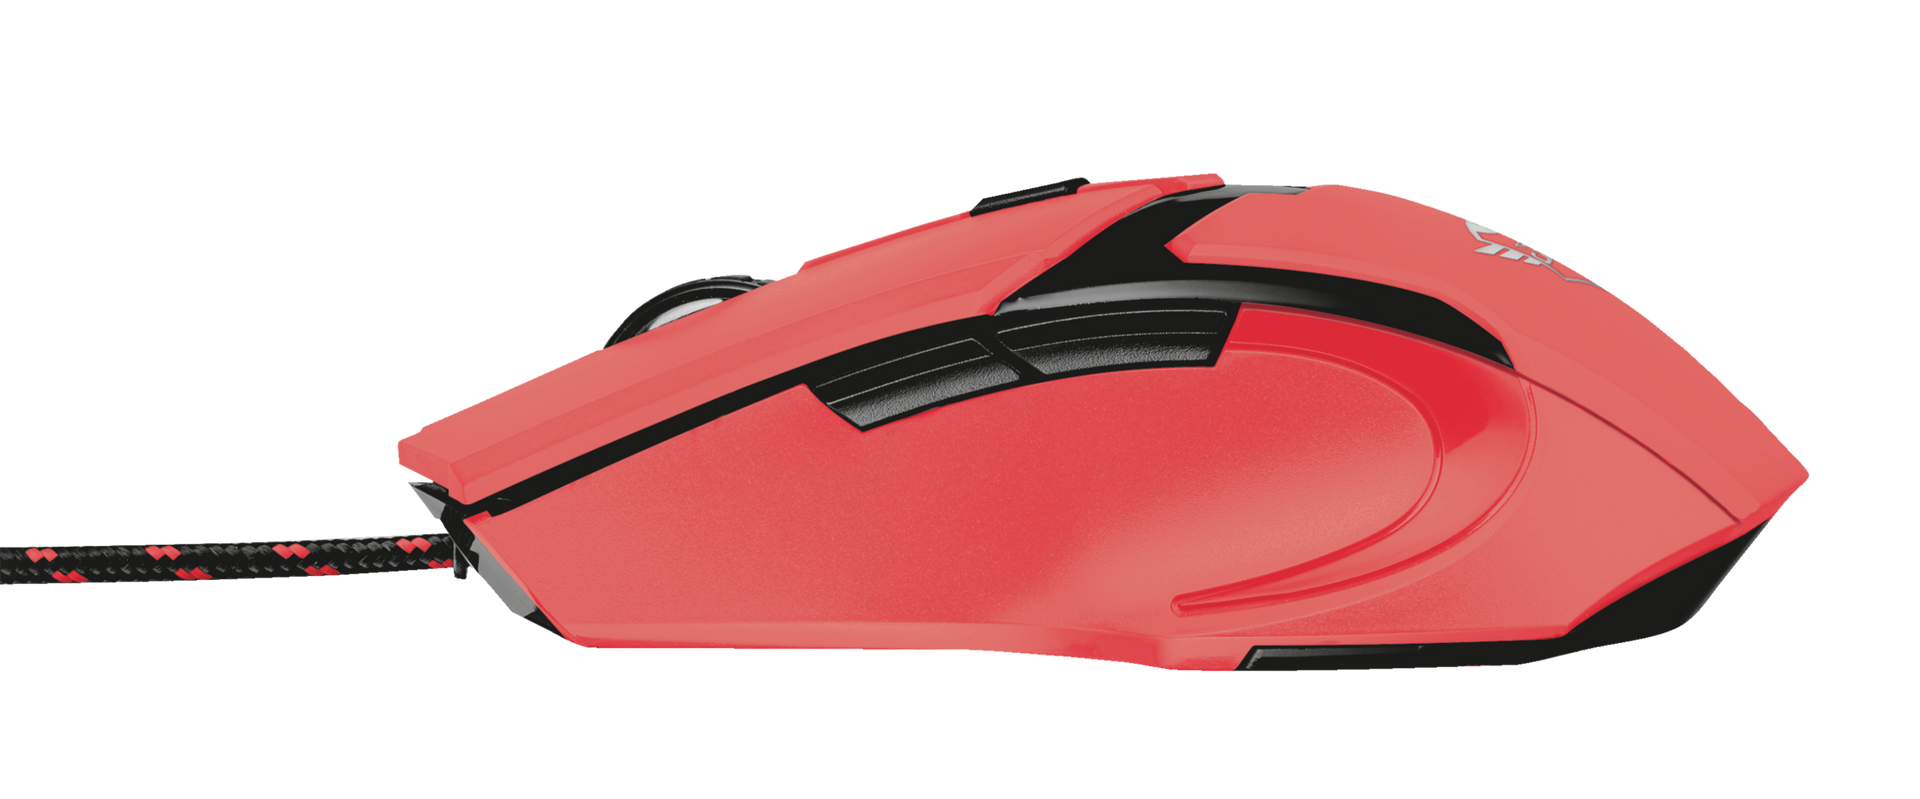 GXT 101-SR Spectra Gaming Mouse - red-Side